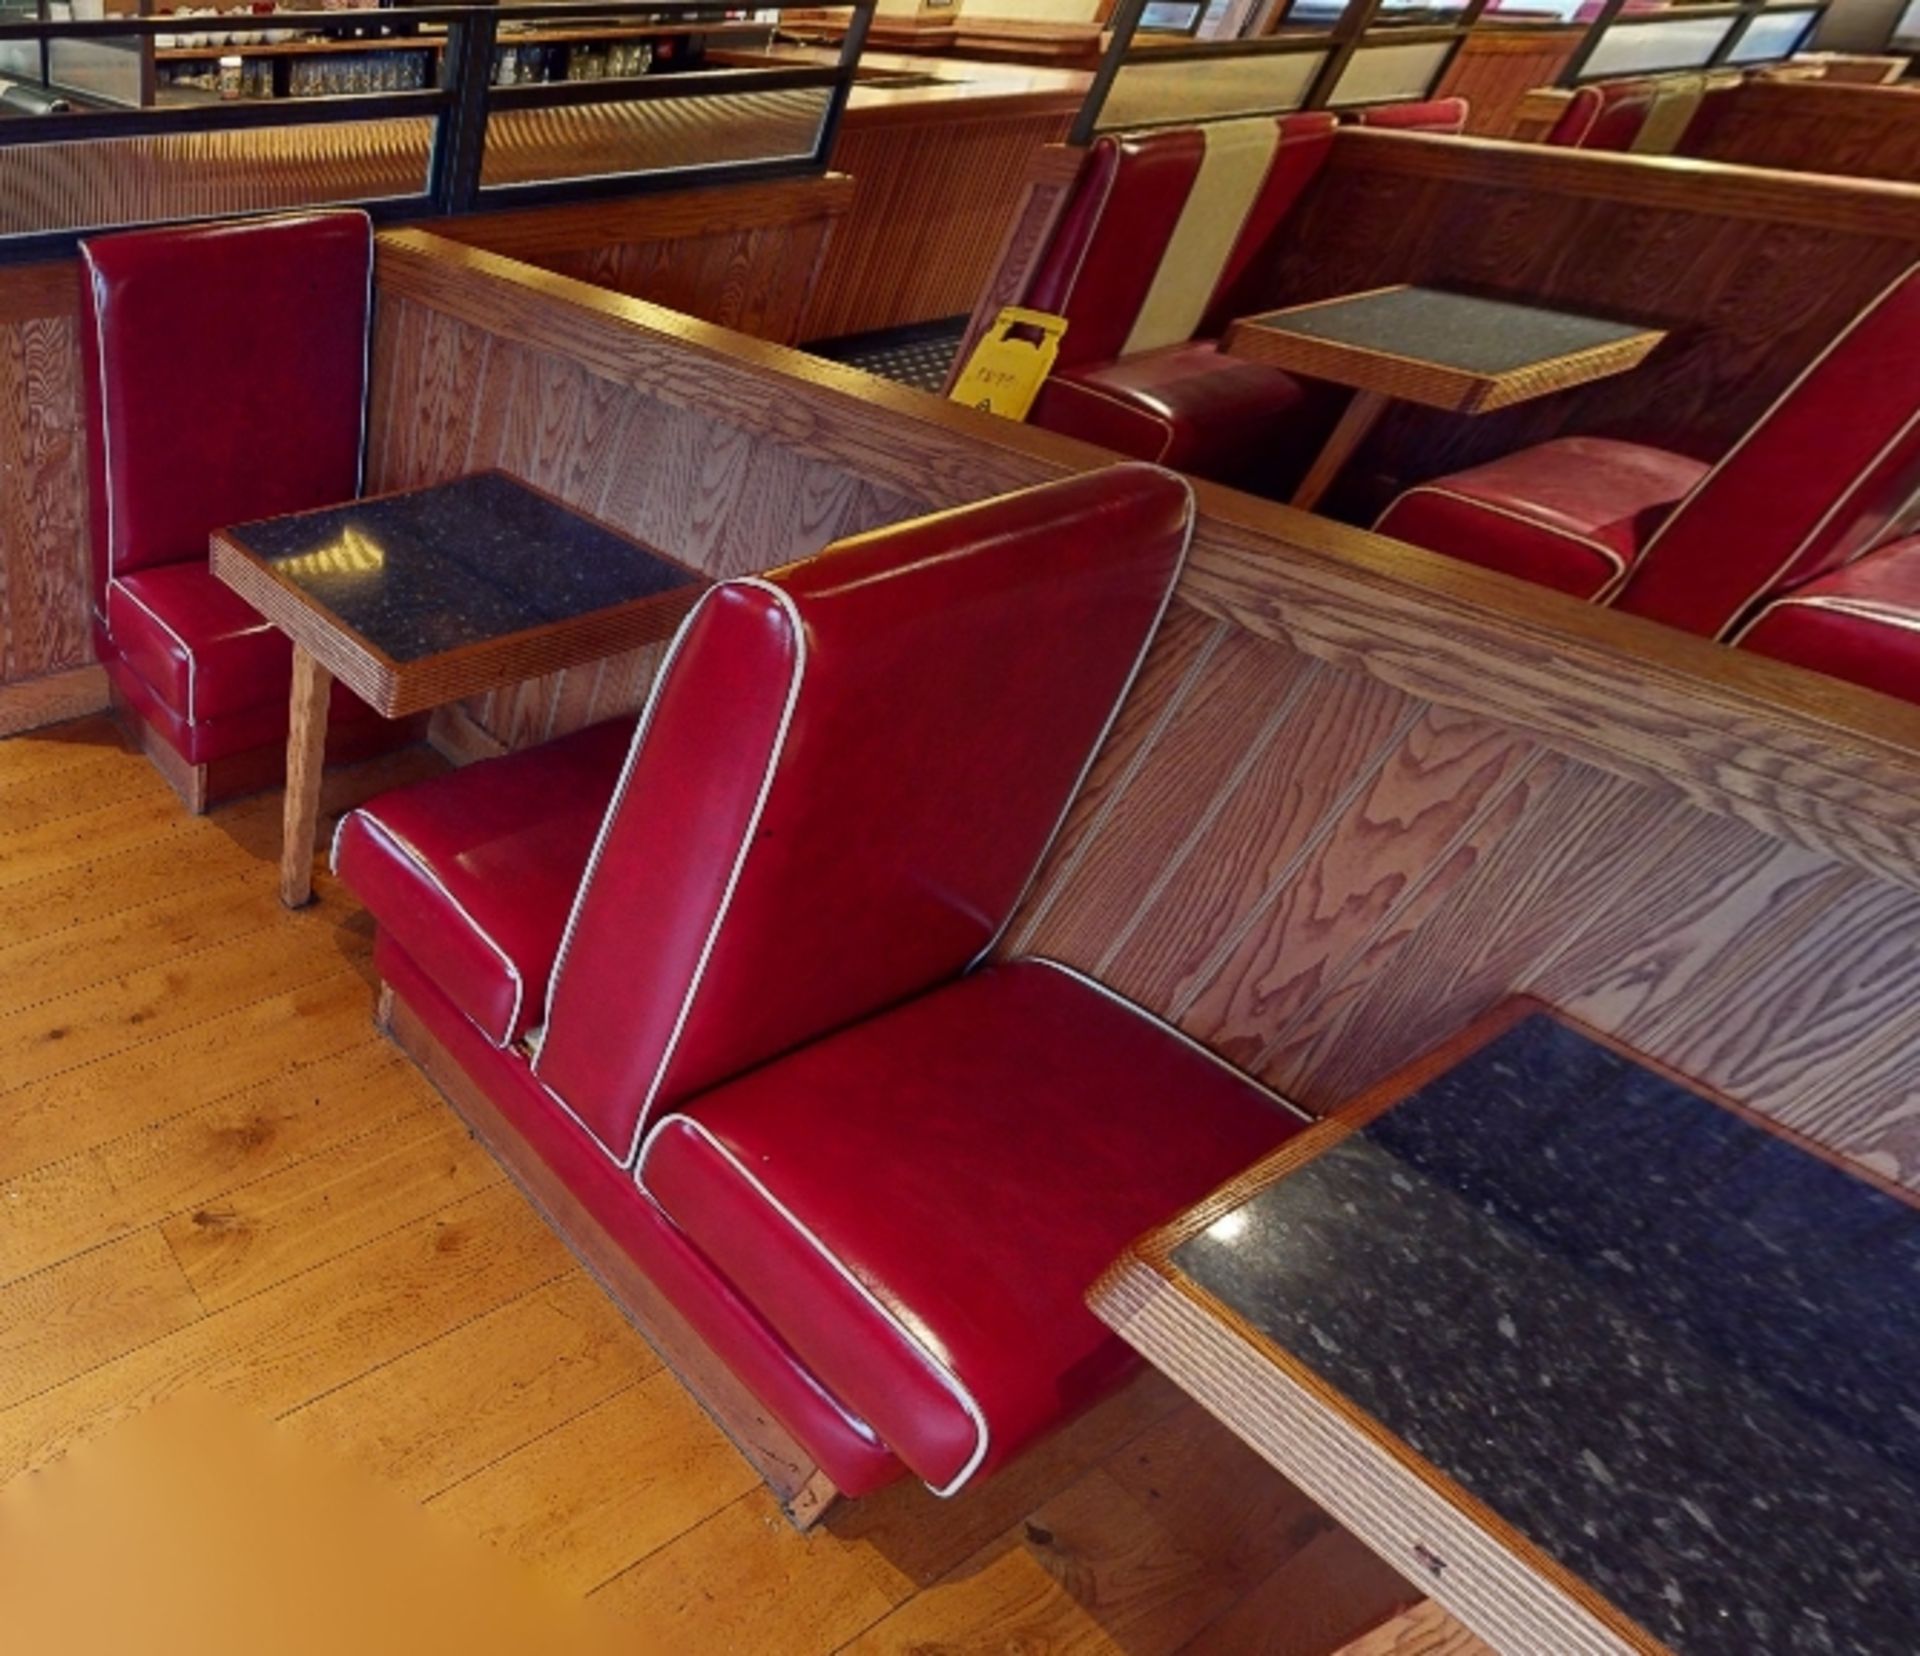 Selection of Single Seating Benches and Dining Tables to Seat Upto 8 Persons - Retro - 1950's - Image 5 of 9